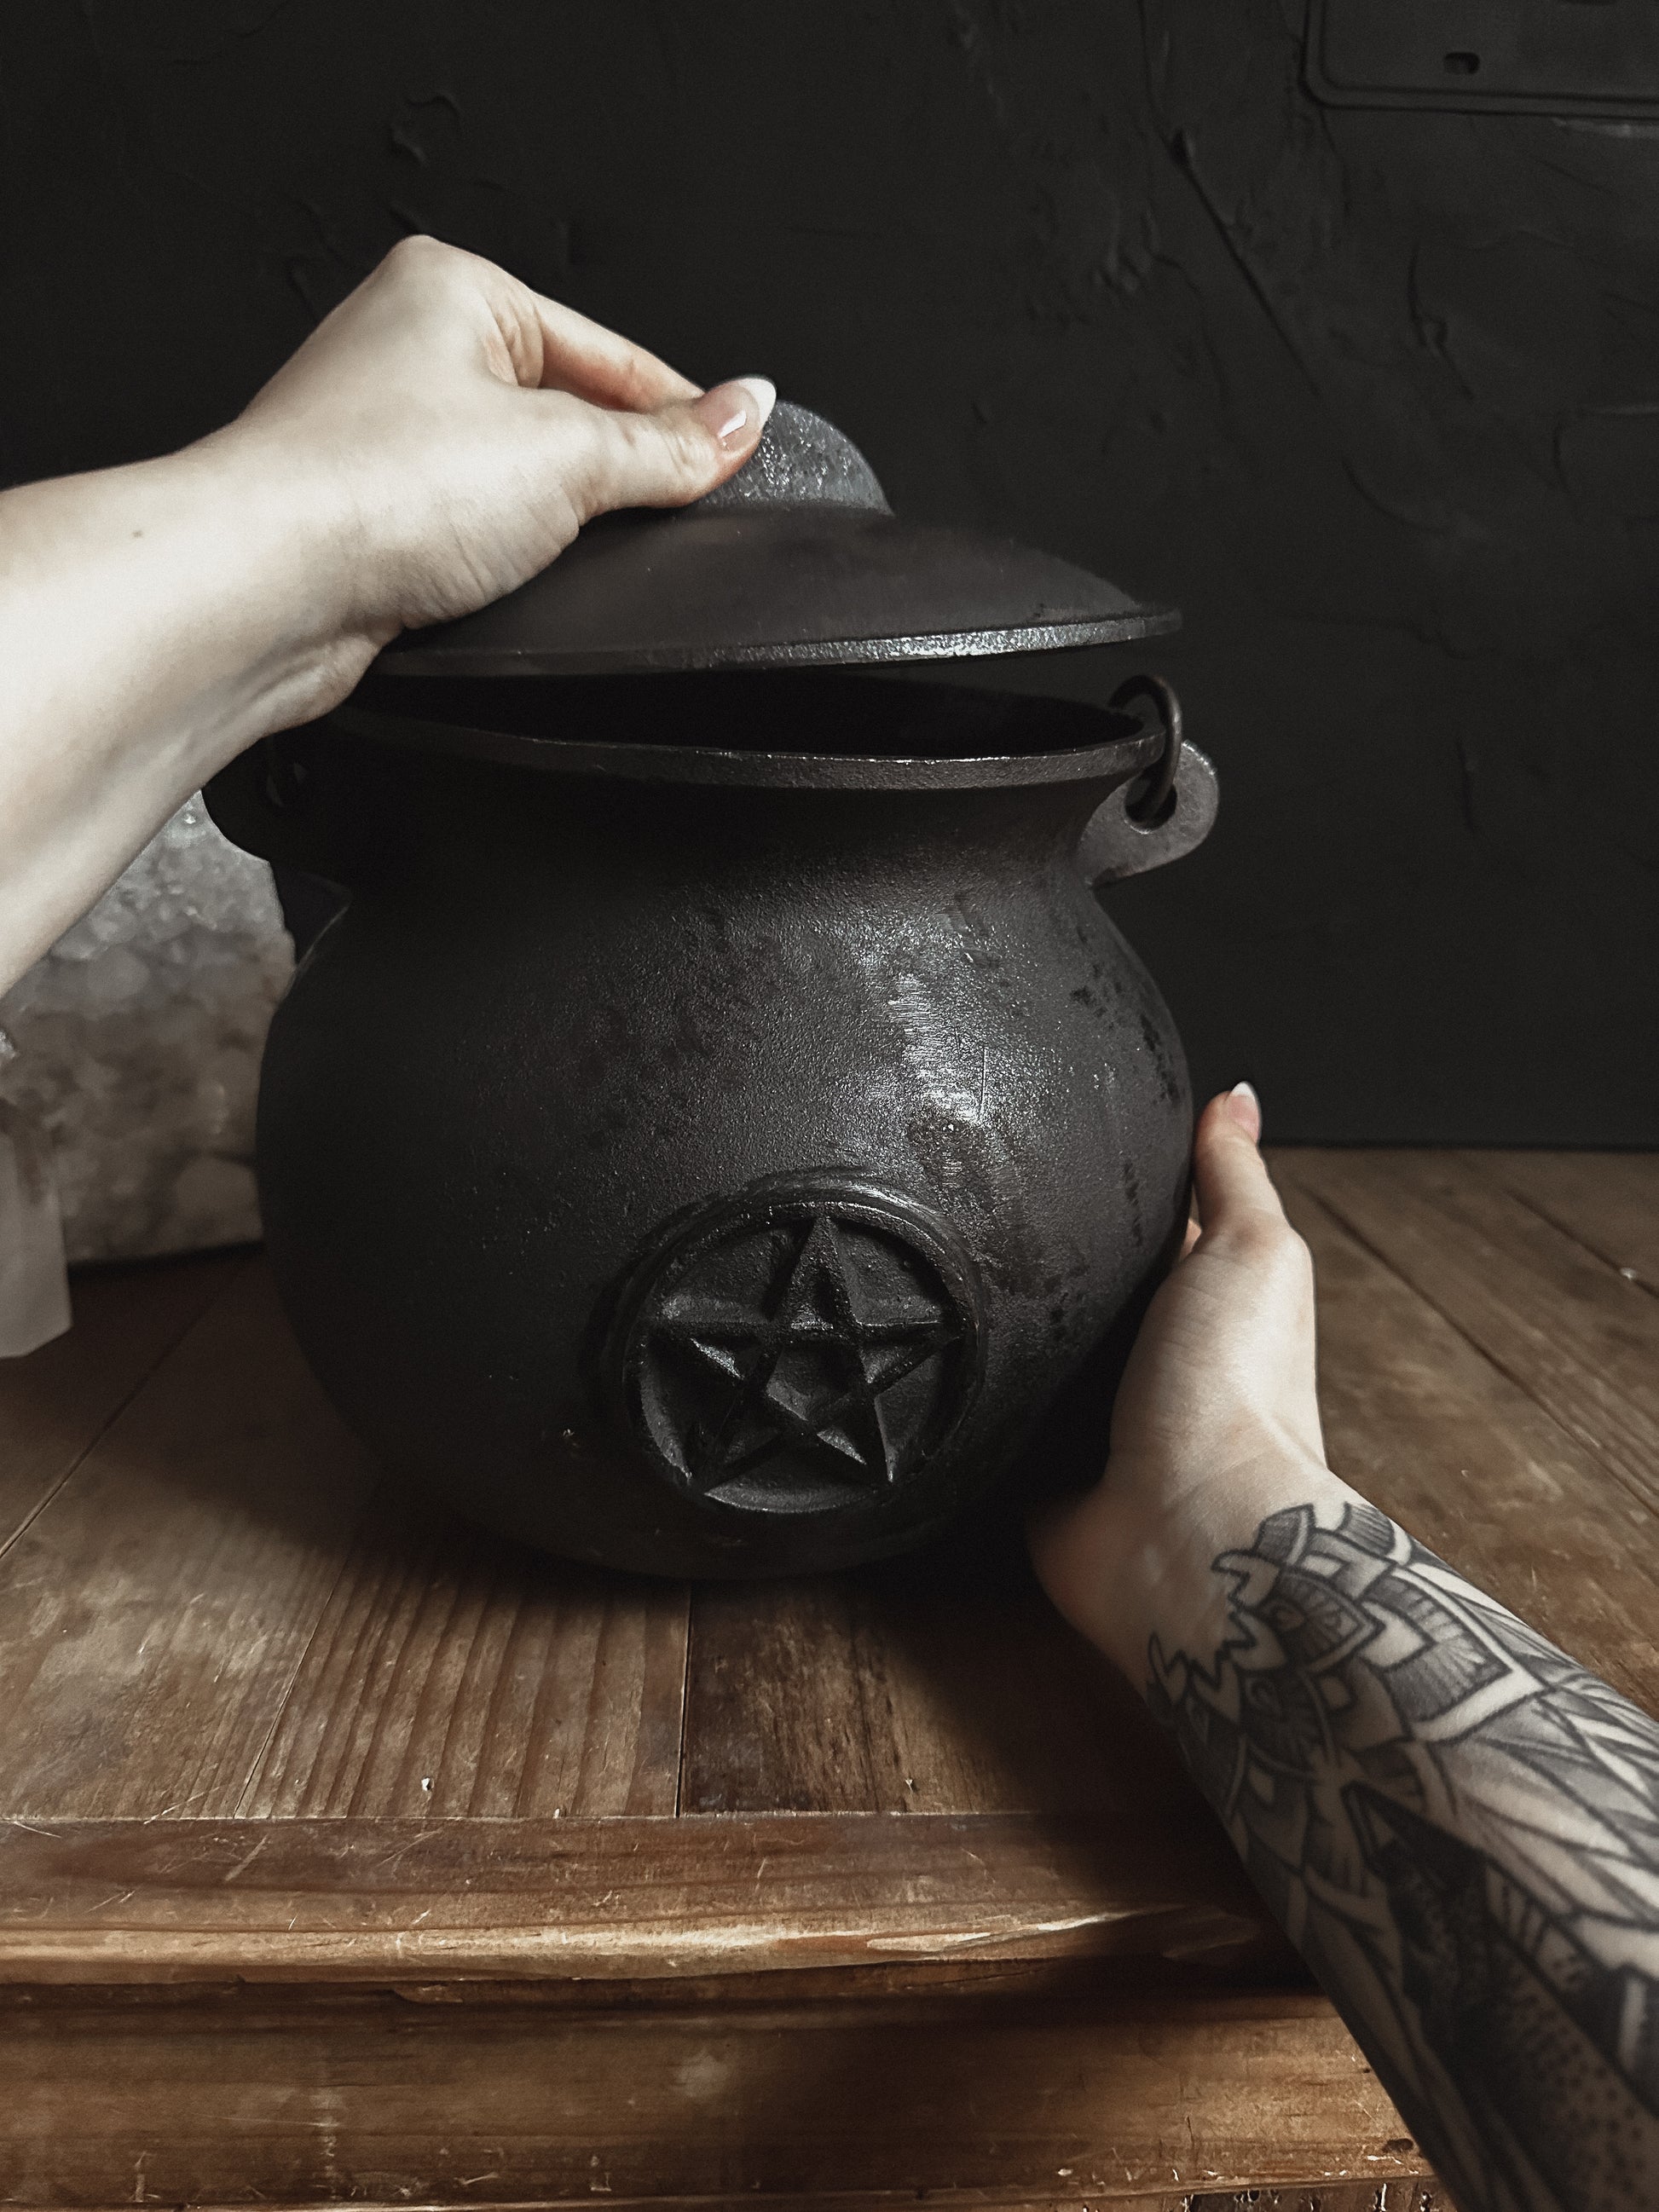 High-quality image showcasing a Extra Large black cast iron cauldron, ideal for brewing potions, burning herbs, and embracing your inner witchy vibes